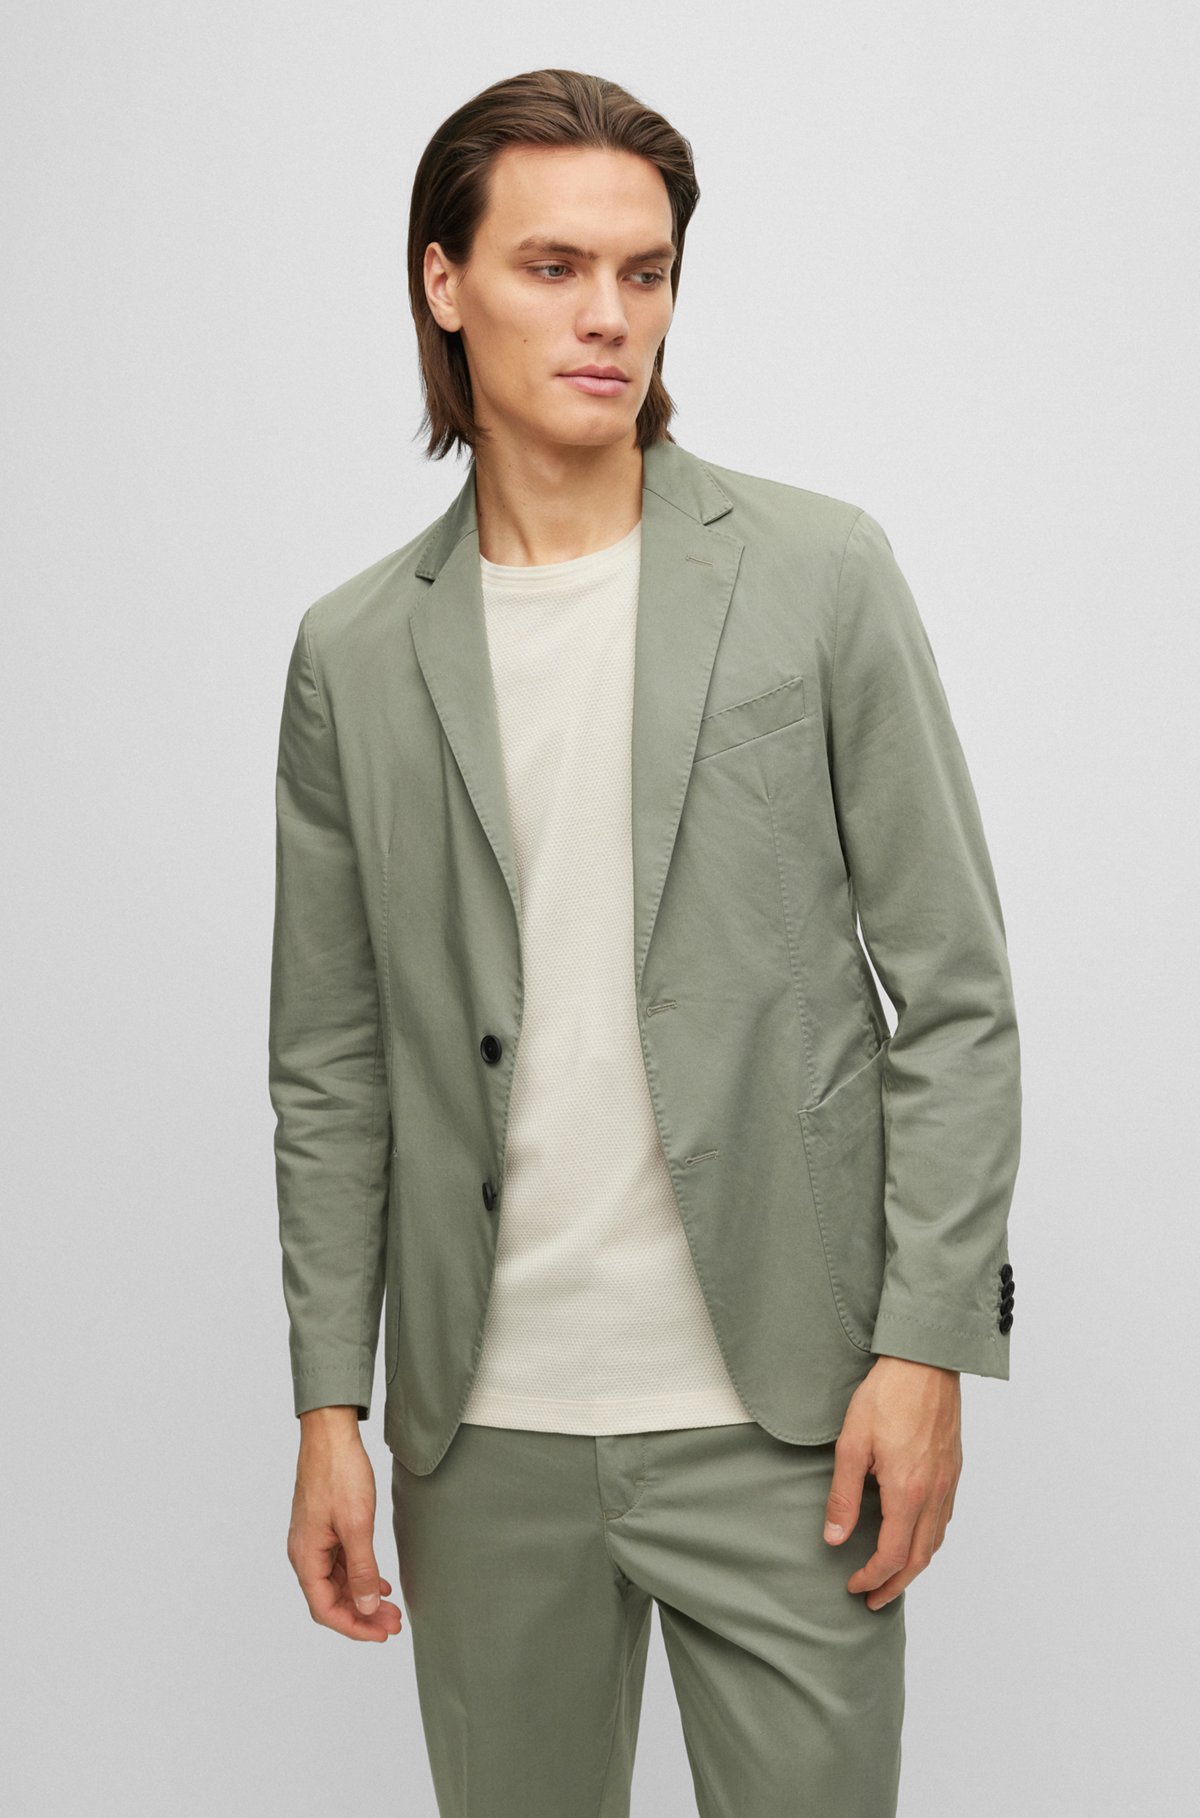 Slim-fit jacket in a crease-resistant cotton blend